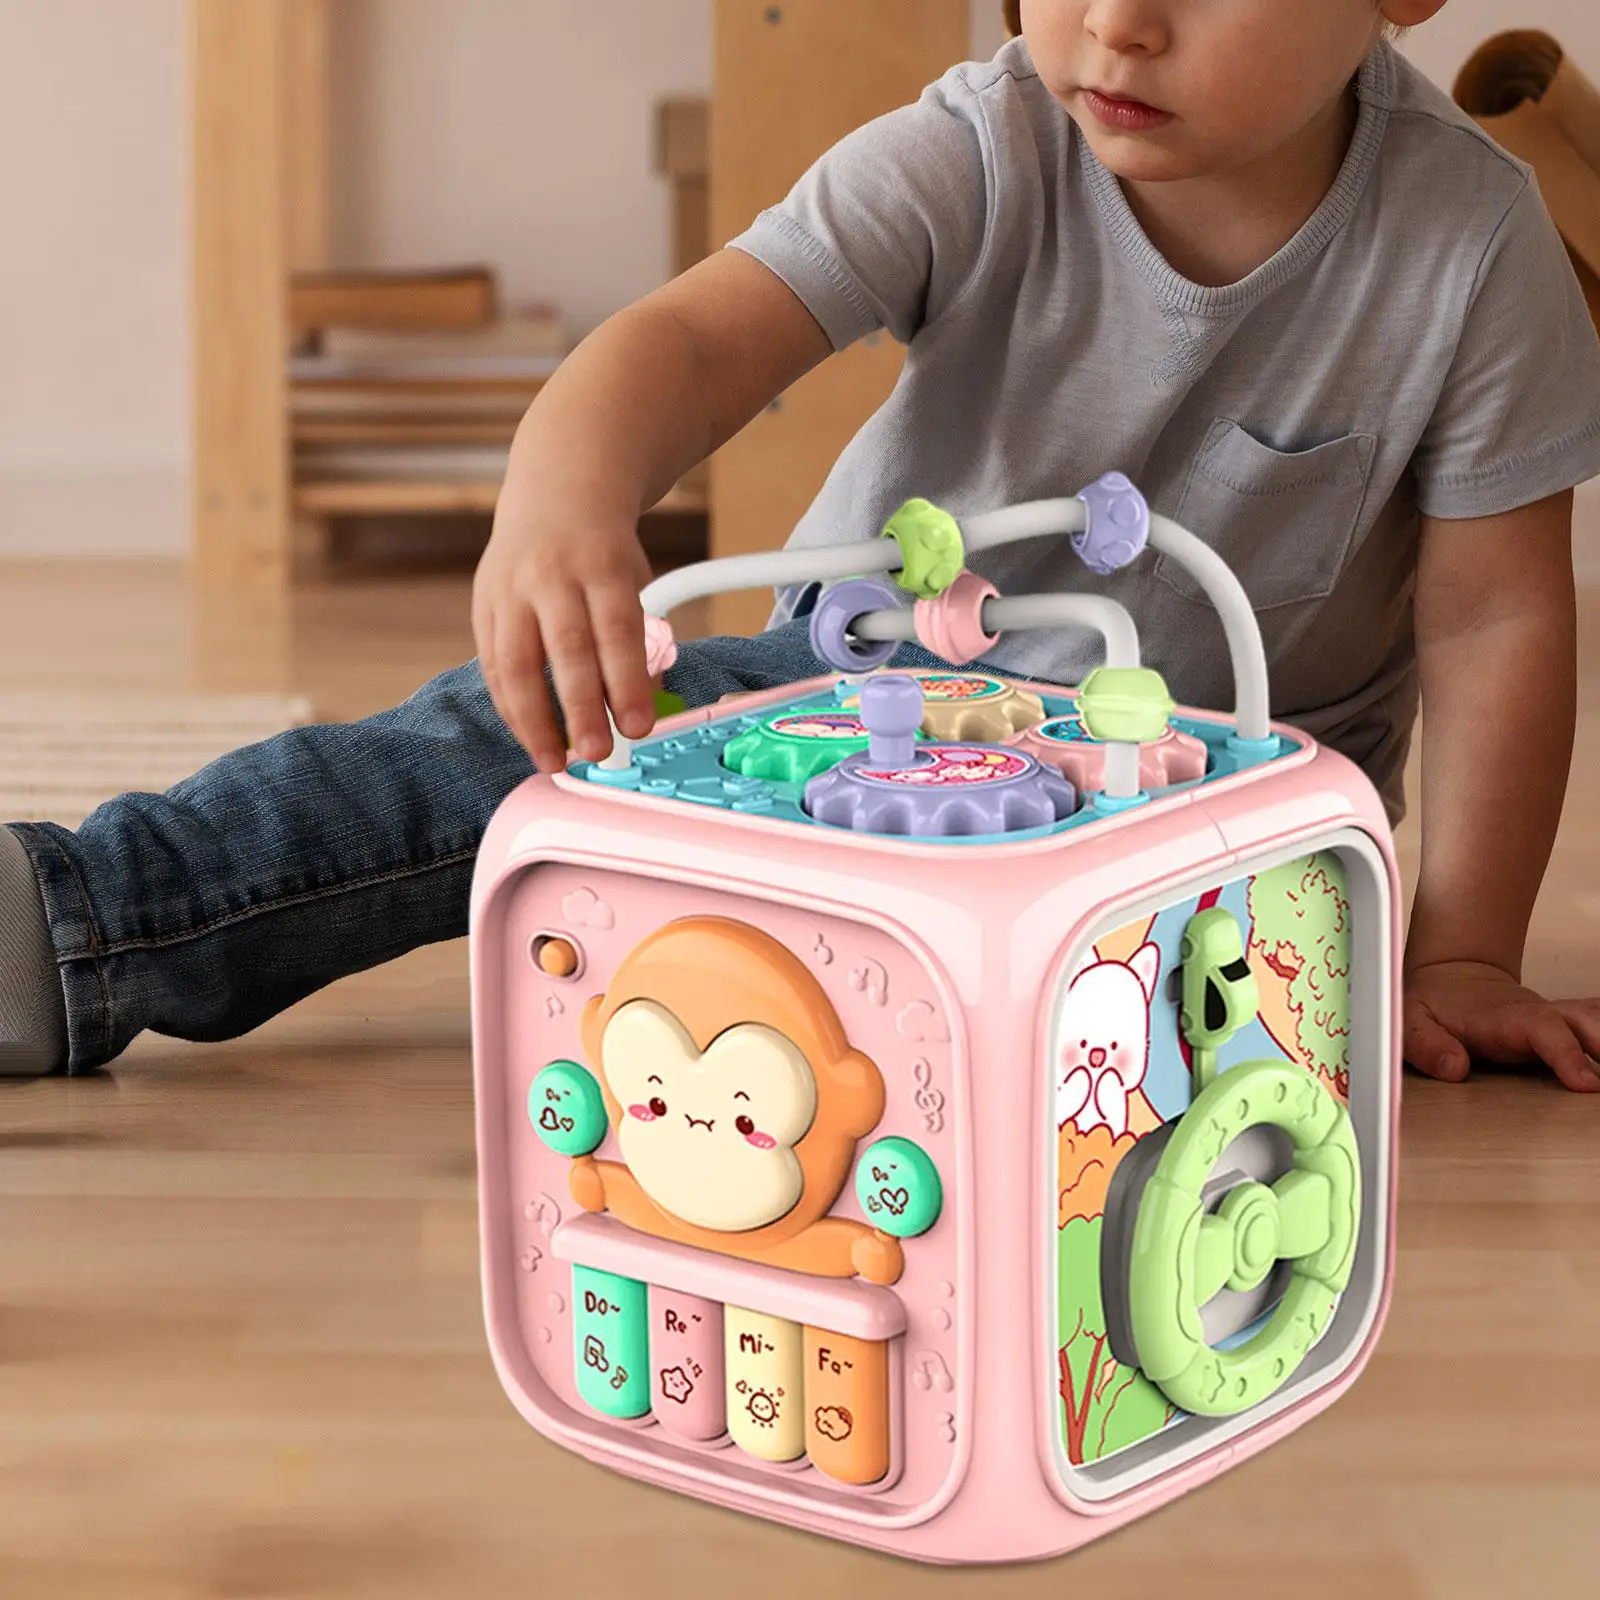 Busy Cube Activity Cube with Flash Light and Sound for Kids Babies Infants